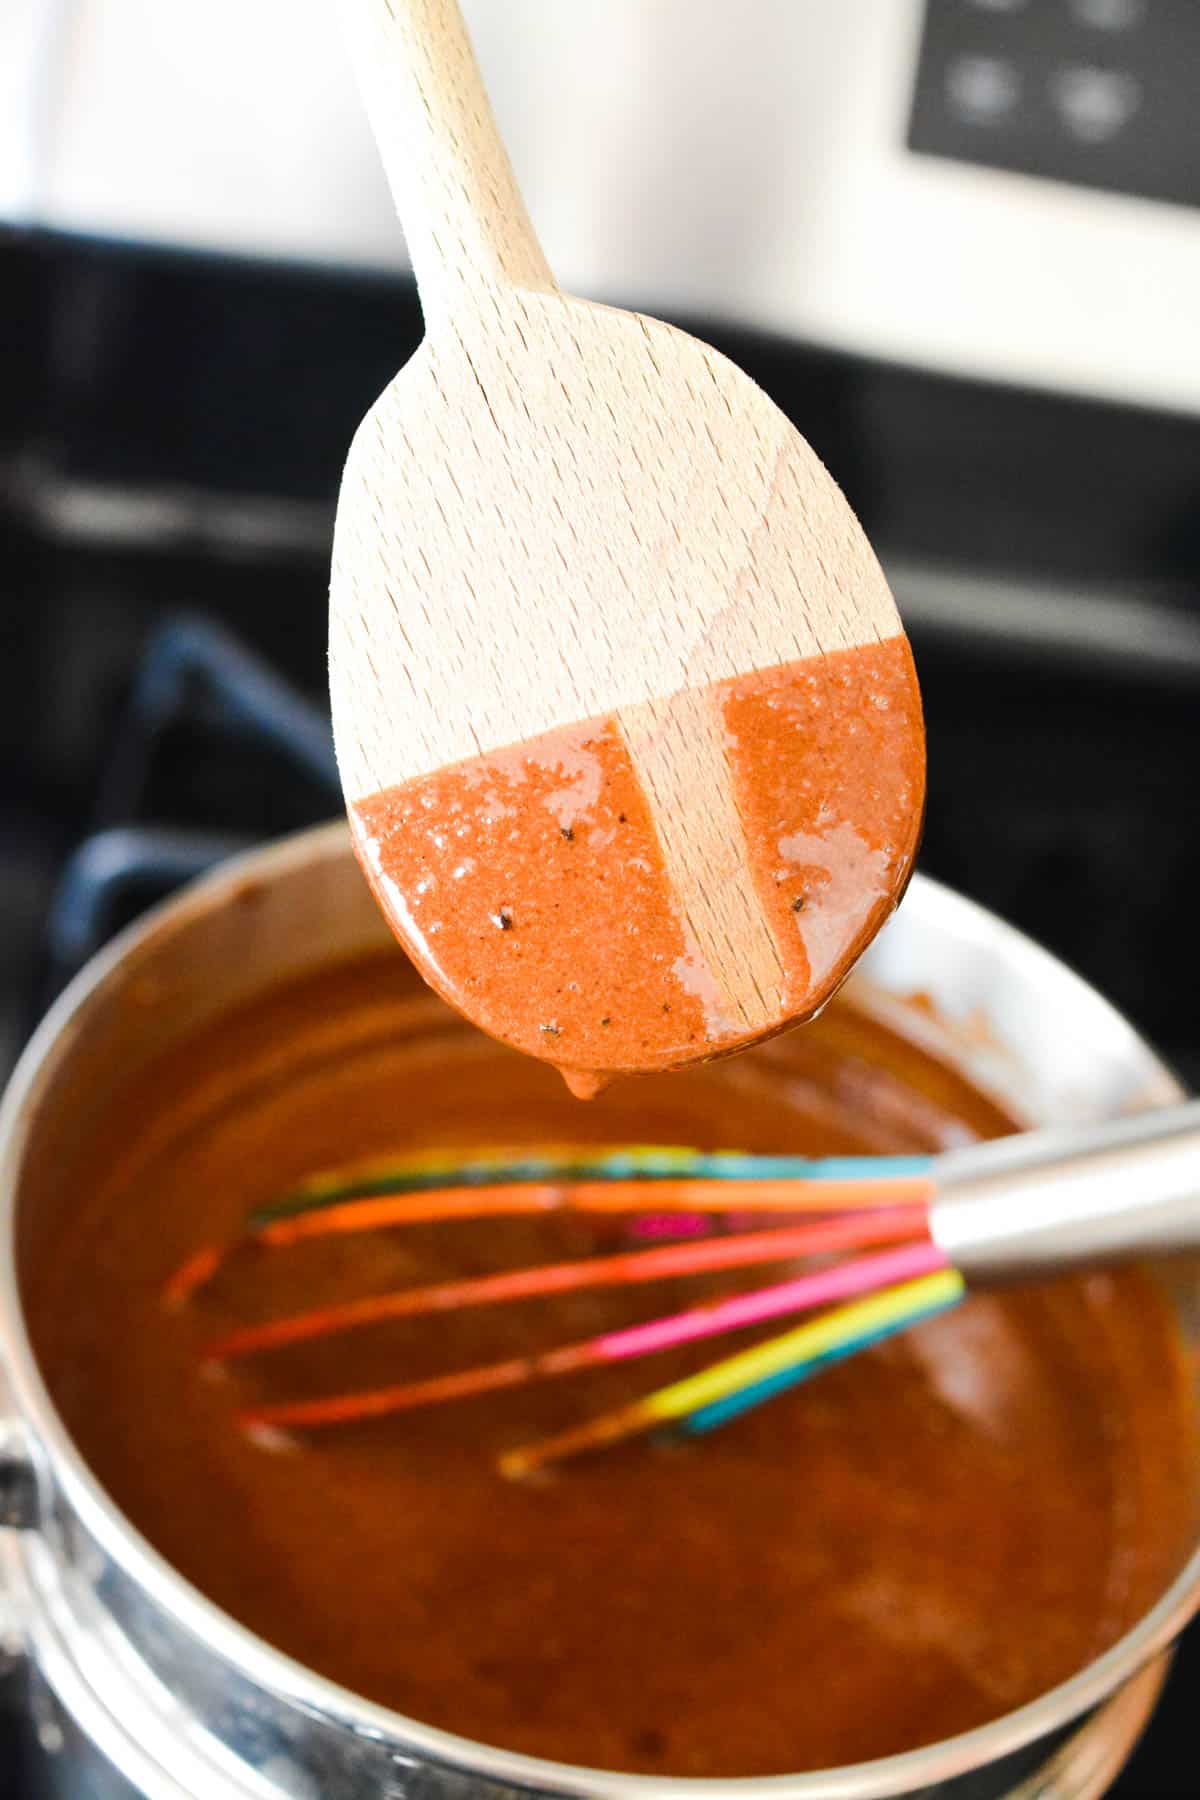 A wooden spoon with a chocolate liquid on it with a stripe missing to test consistency.